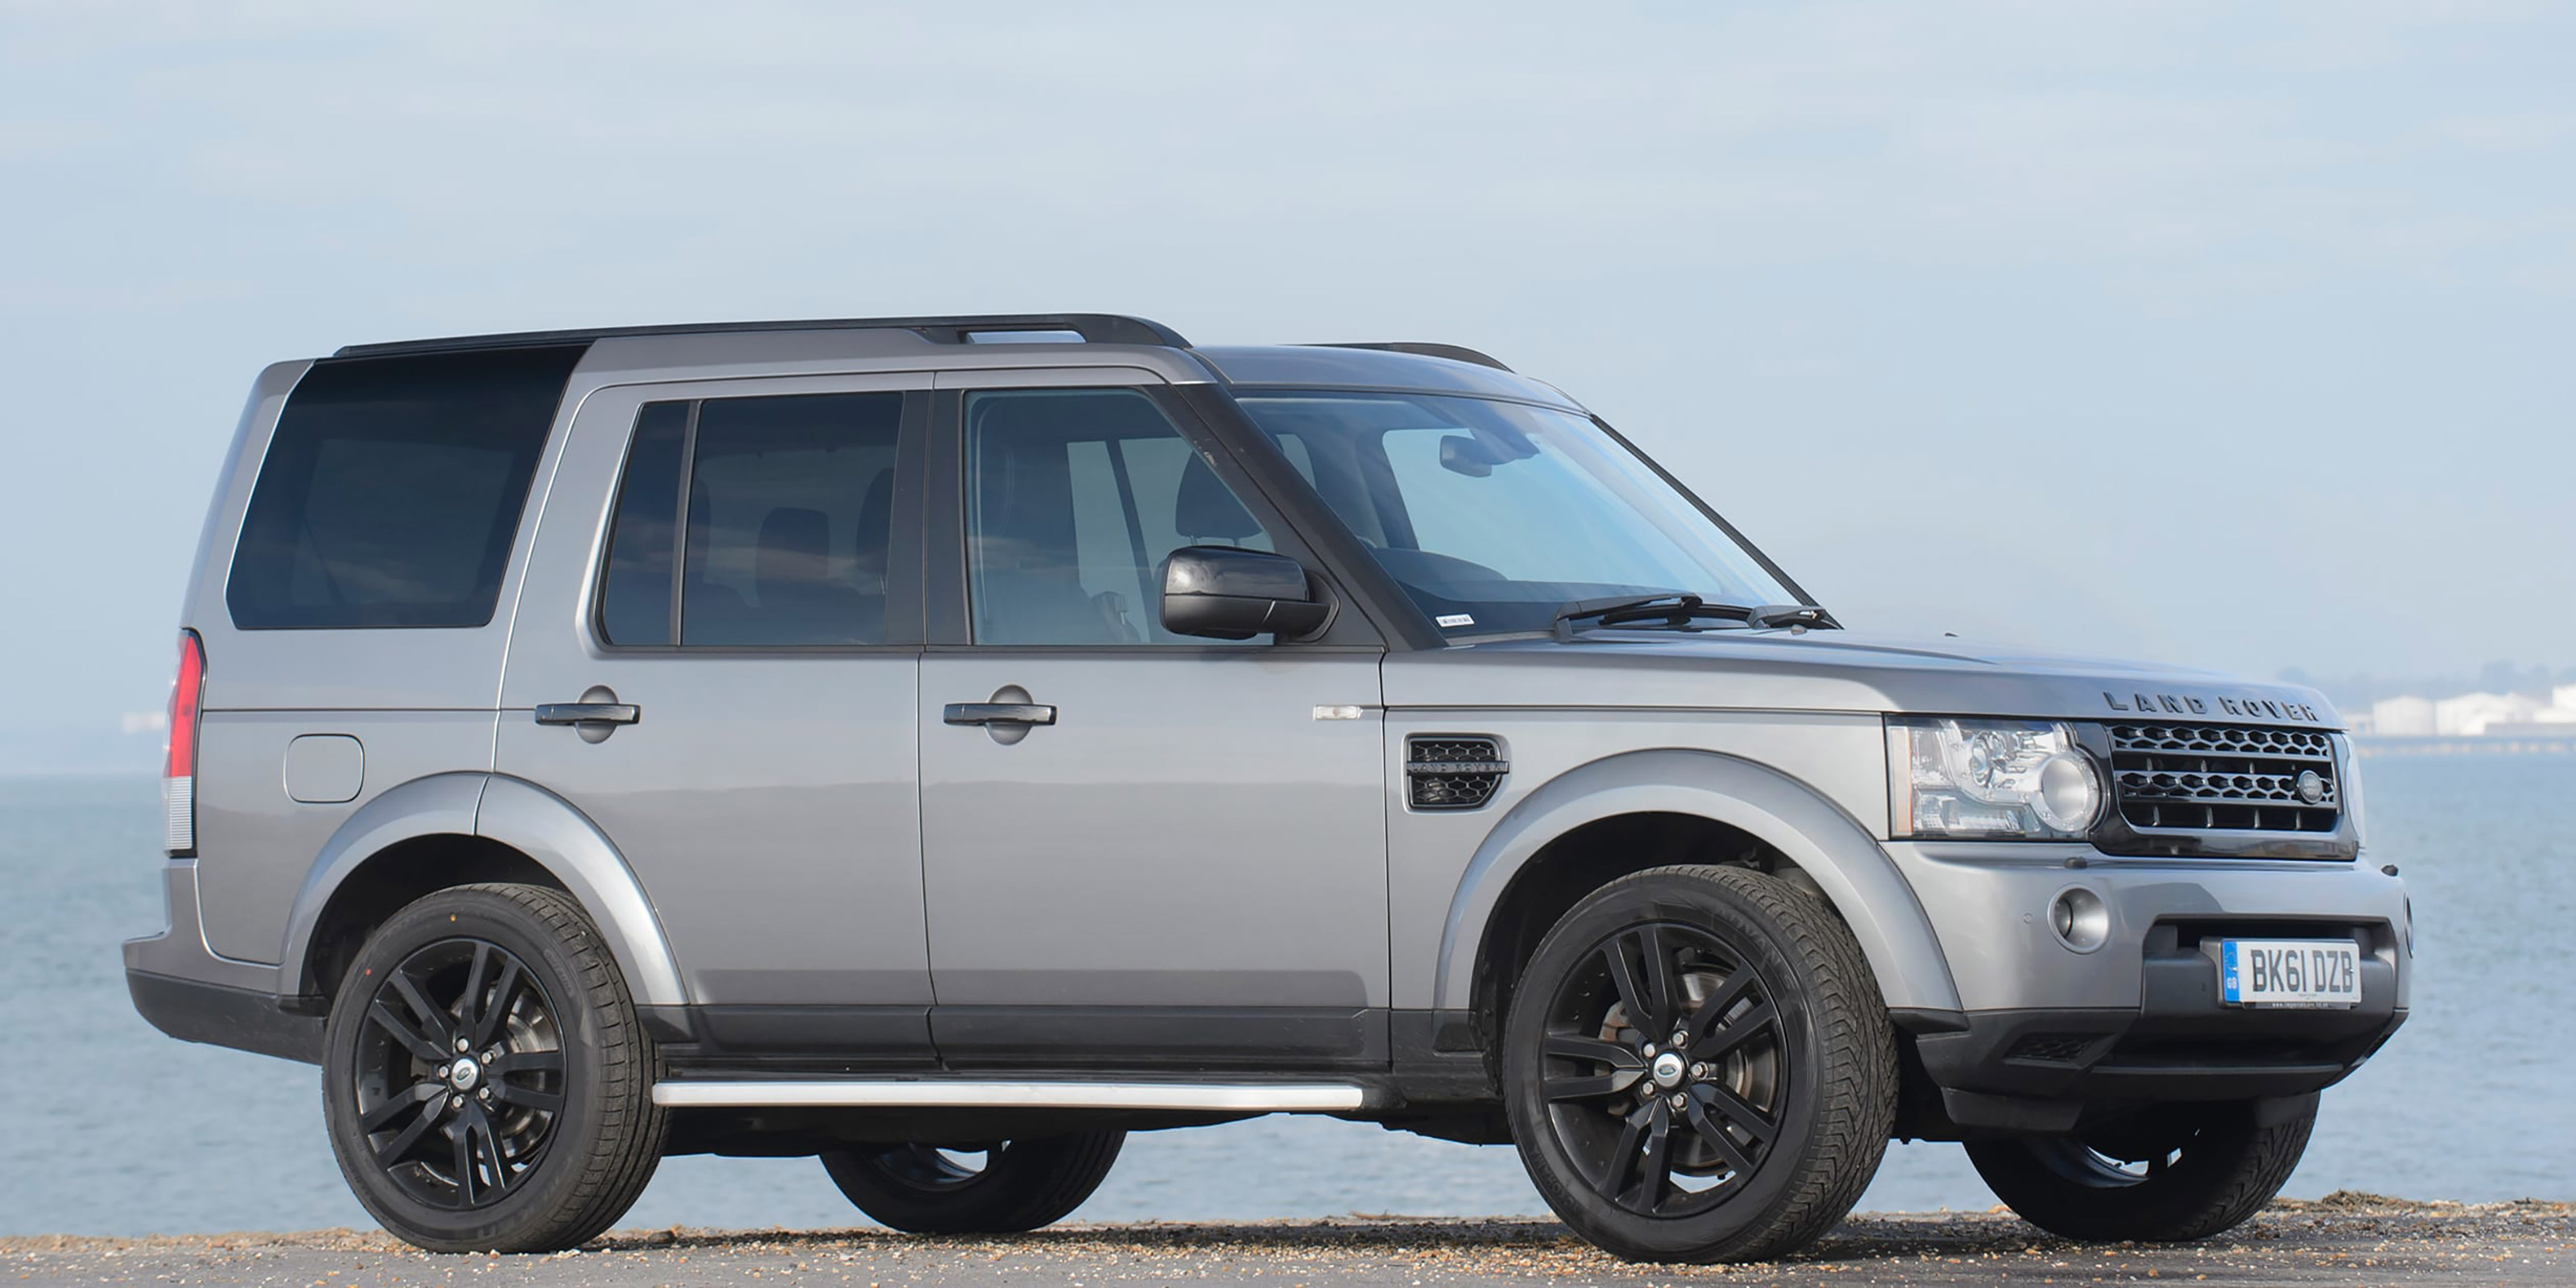 Used Land Rover Discovery 4 review Auto Express